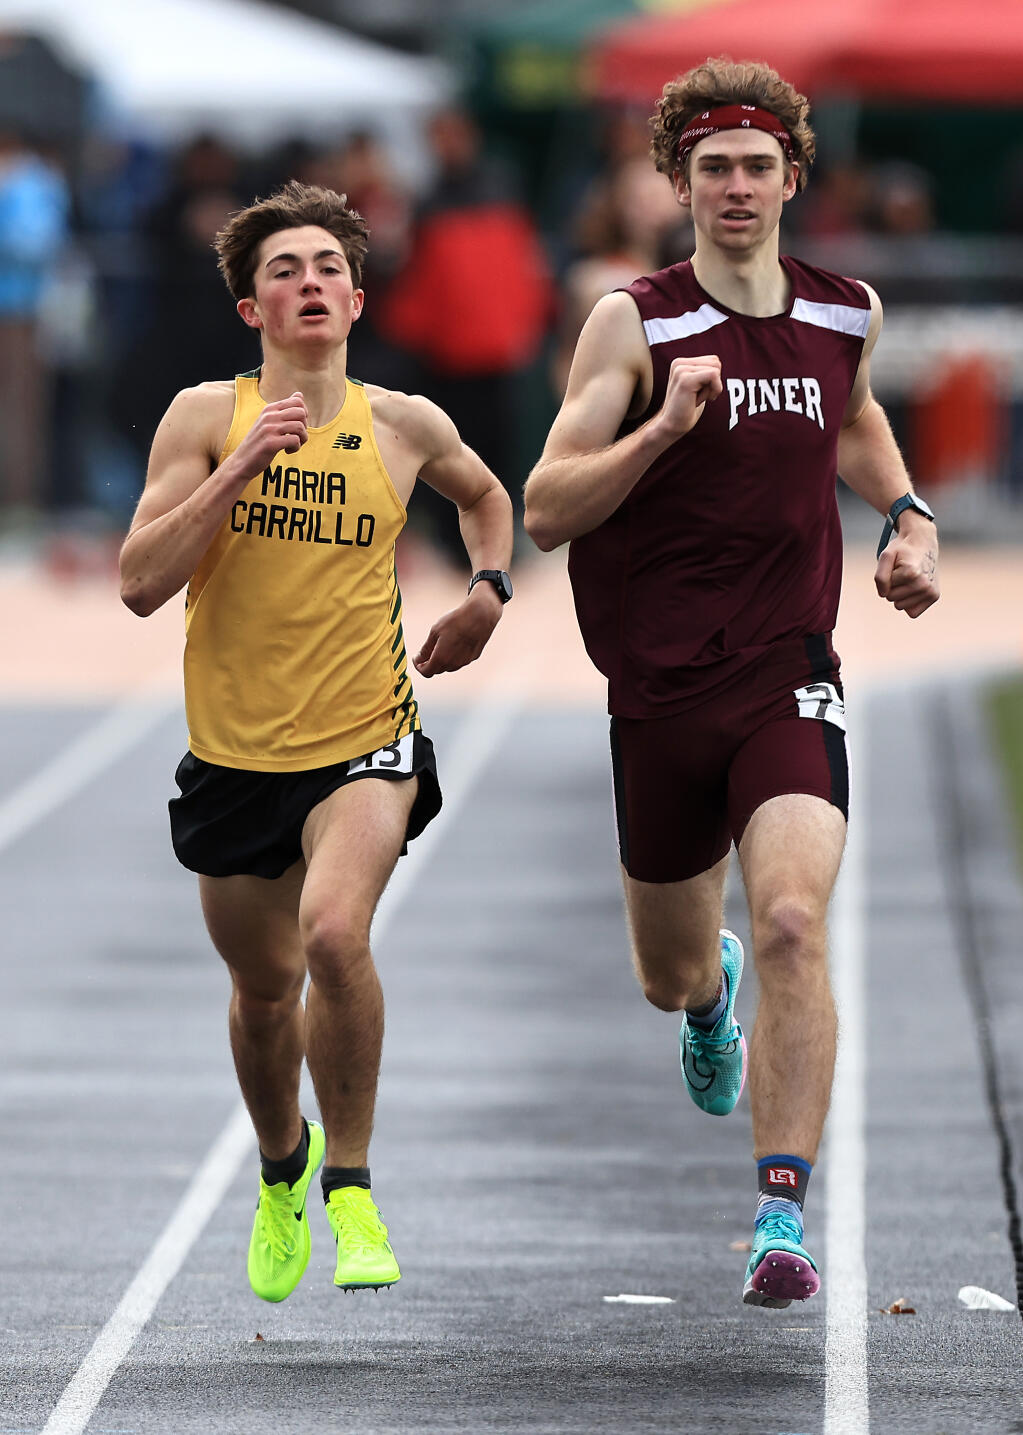 Piner High School’s Jared Hayes, right, edges Maria Carrillo’s Jack Wilson for the top spot in the boys varsity 1600 meter run, during the Big Cat Invitational at Santa Rosa High School, Saturday, March 4, 2023. (Kent Porter / The Press Democrat) 2023